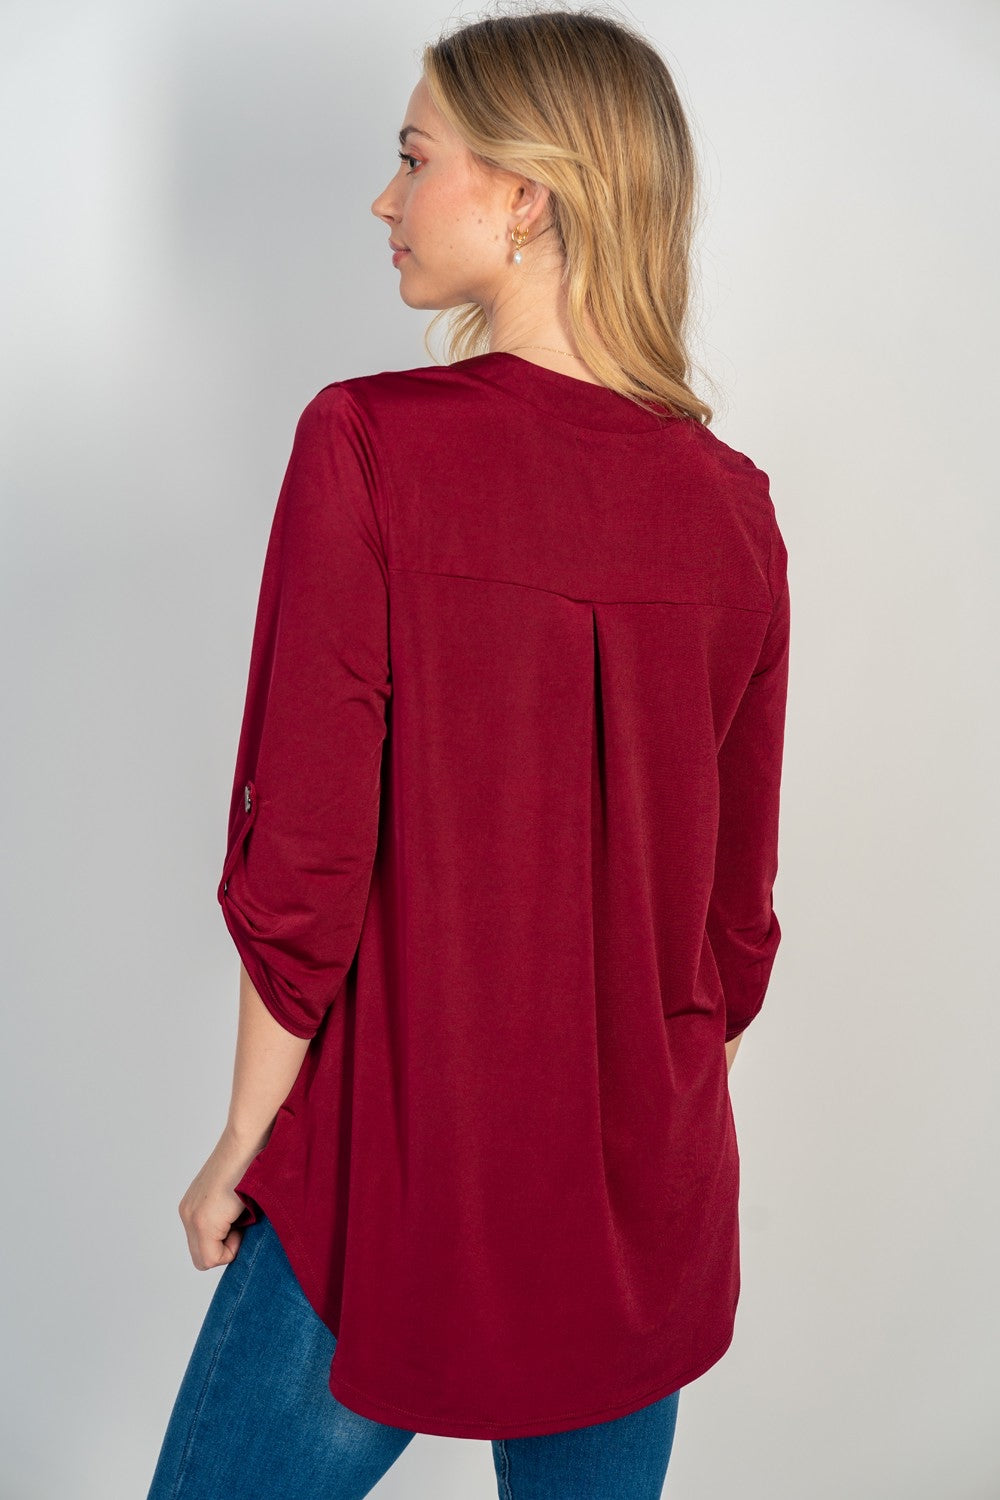 GABBY 3/4 BUTTON SLEEVE TOP (multiple colors)